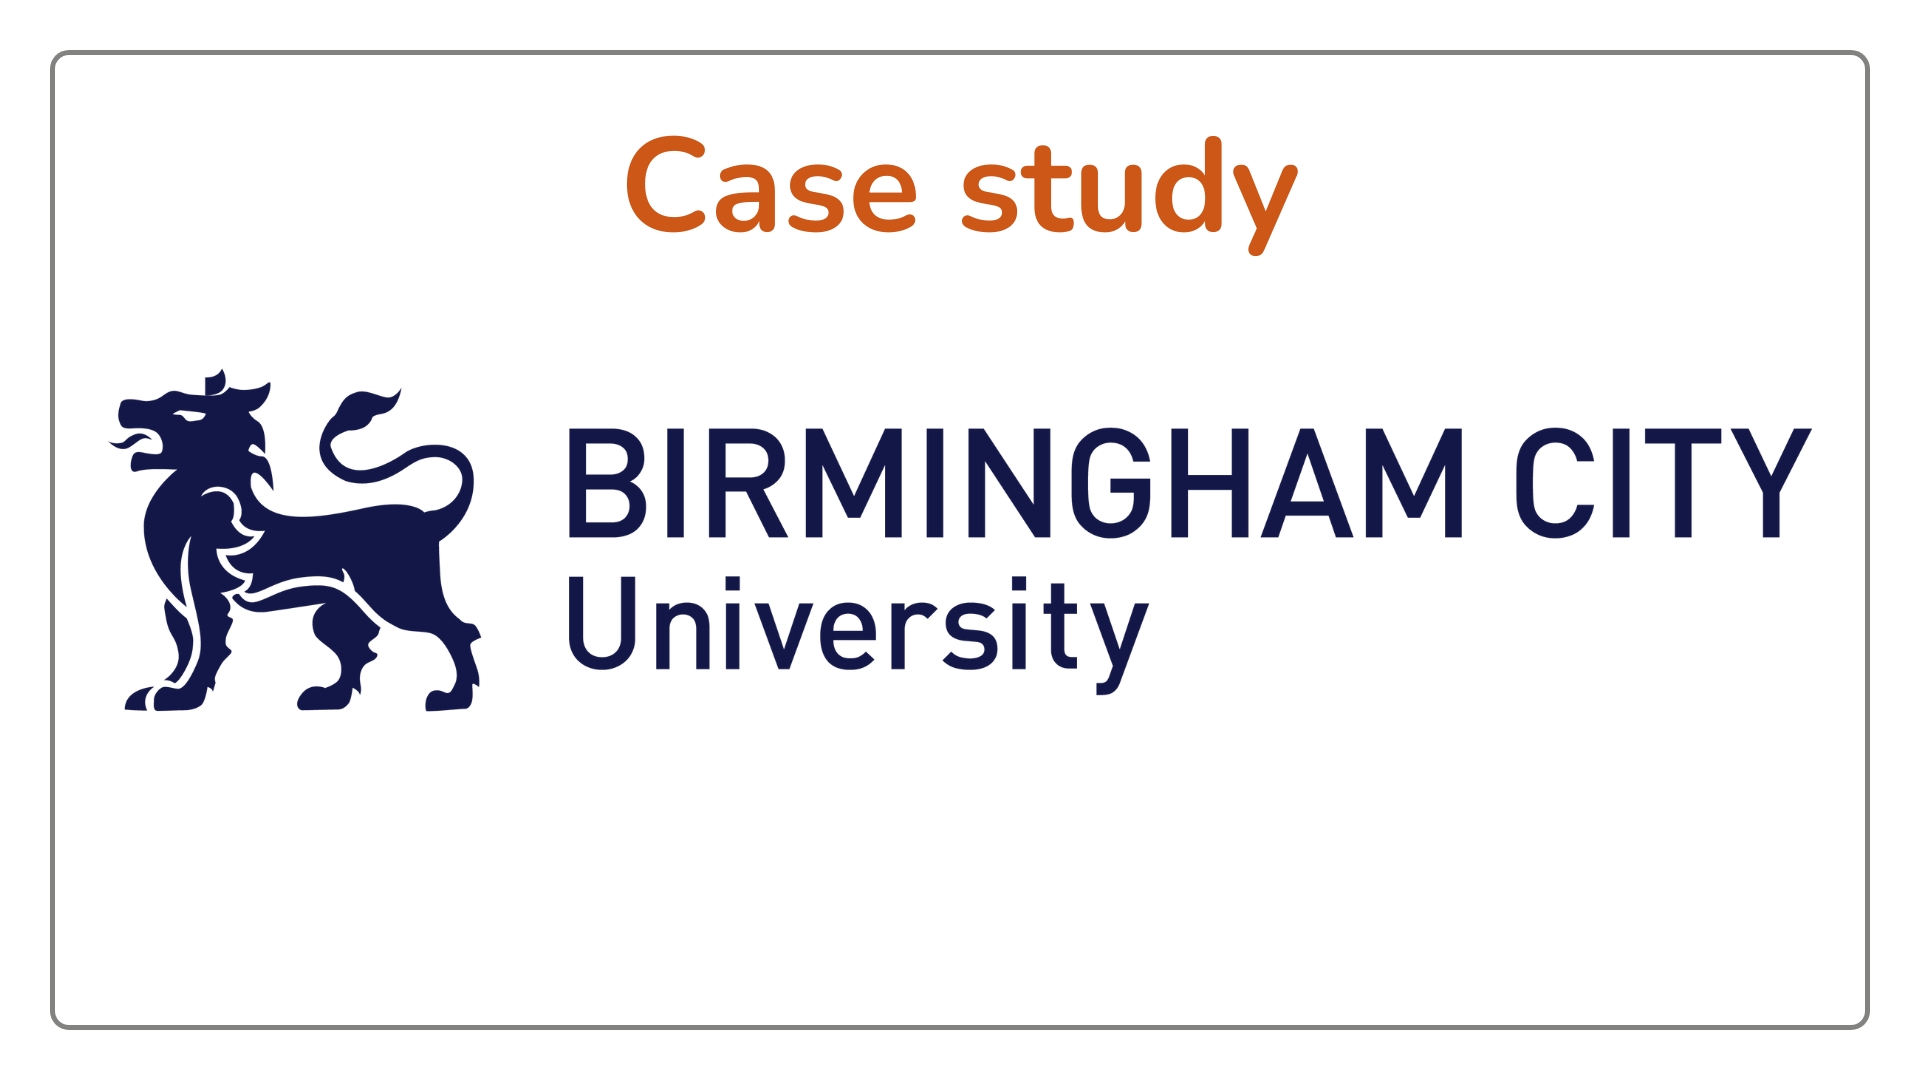 Preferred supplier to BCU – finance and legal recruitment services